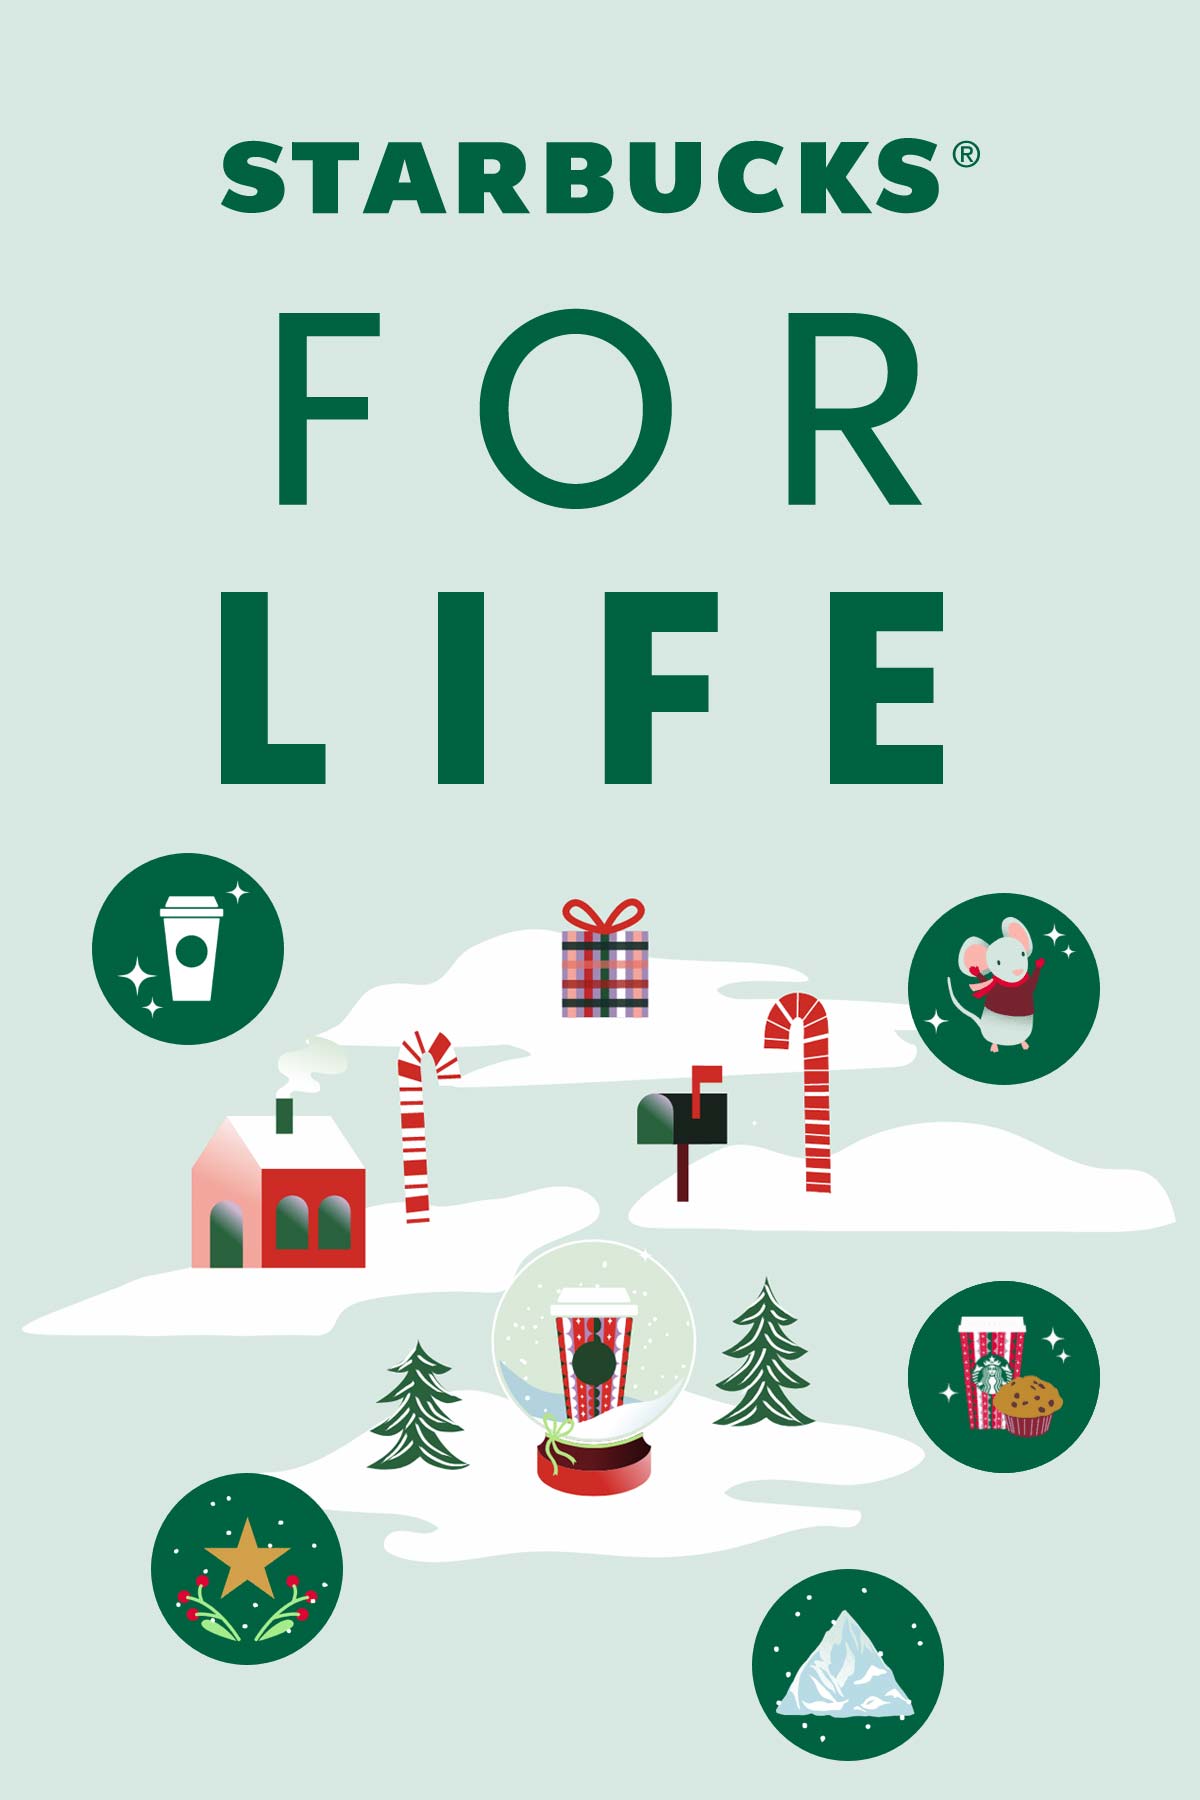 Starbucks for Free graphic with holiday illustrations.